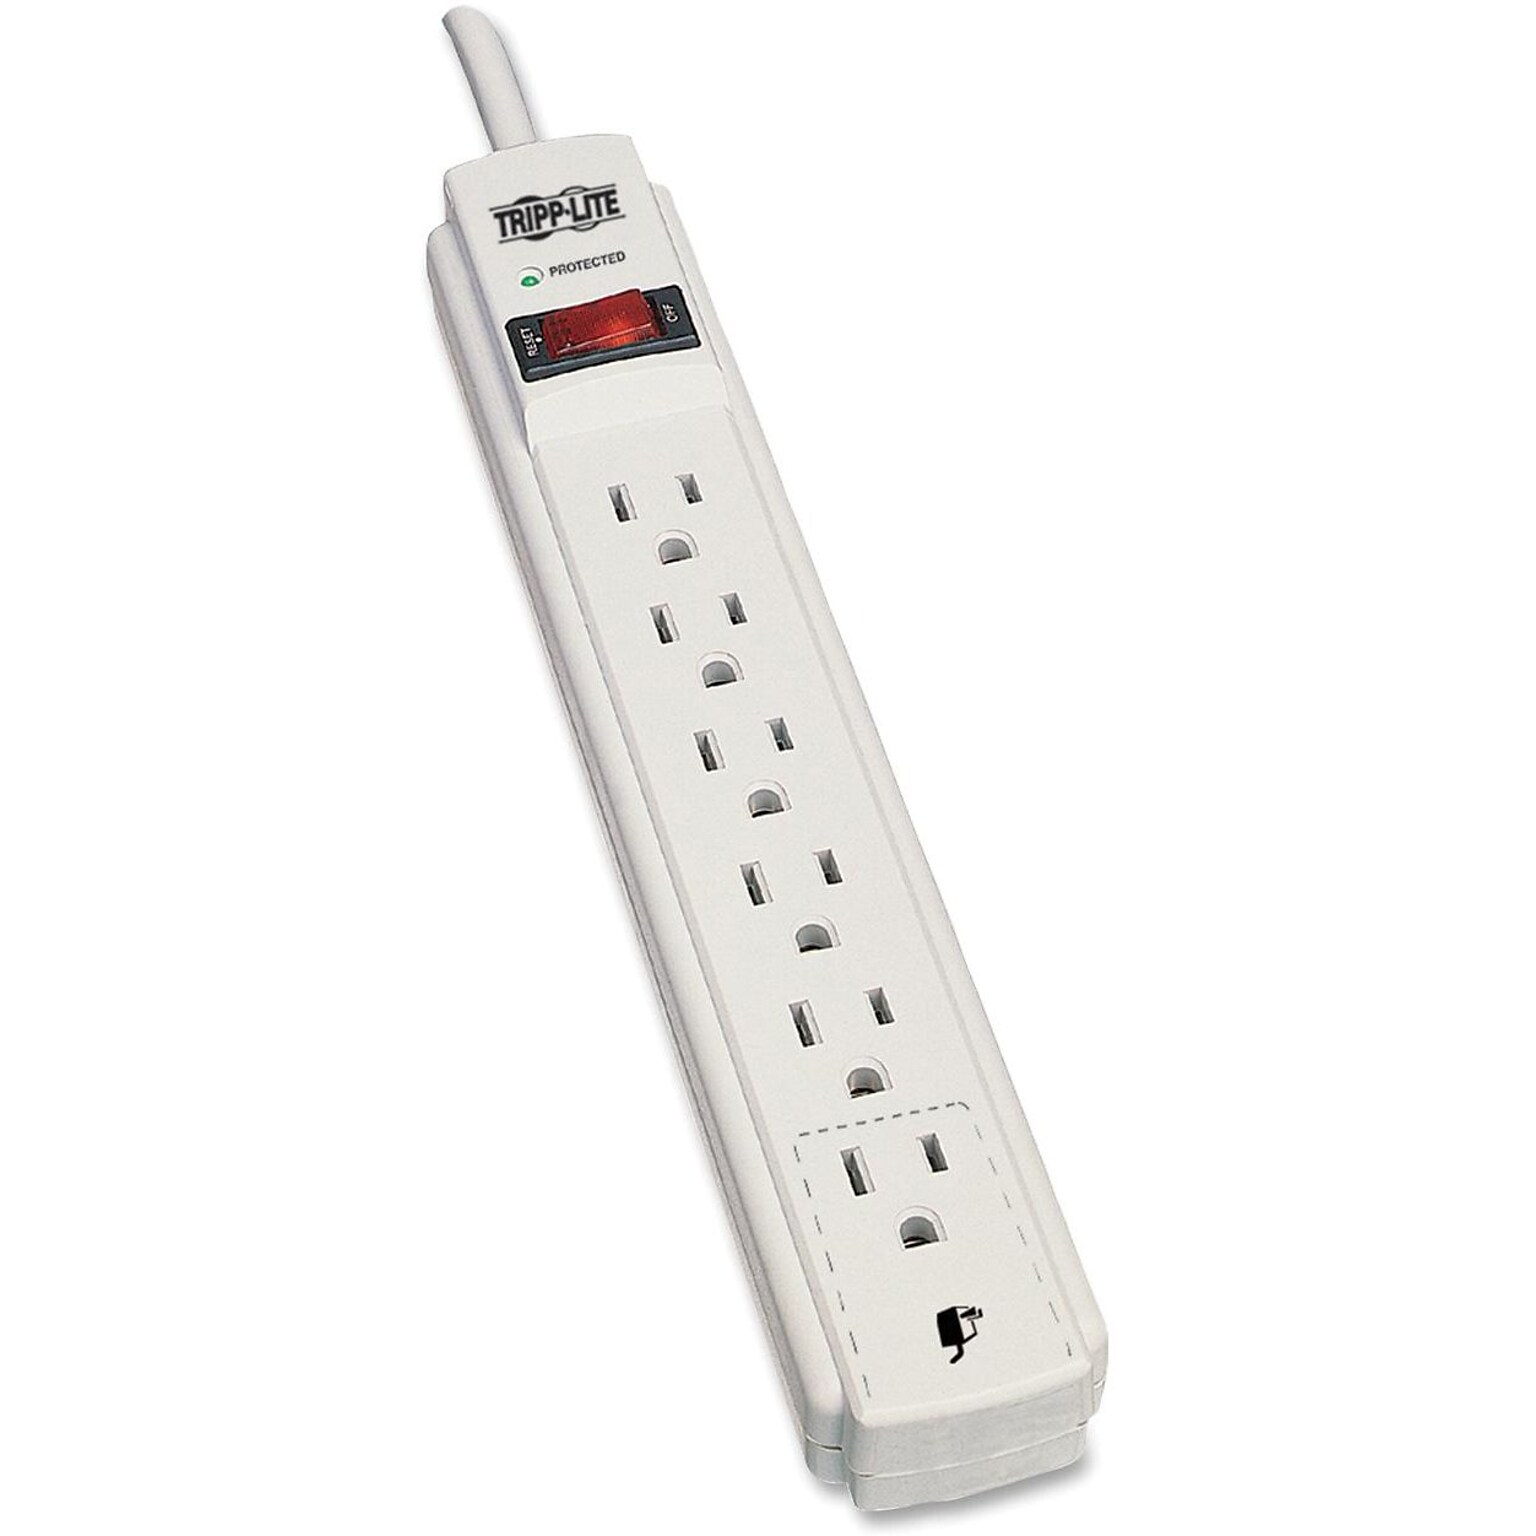 Tripp Lite Protect it!® 6-Outlet 790 Joule Surge Suppressor With 15 Cord